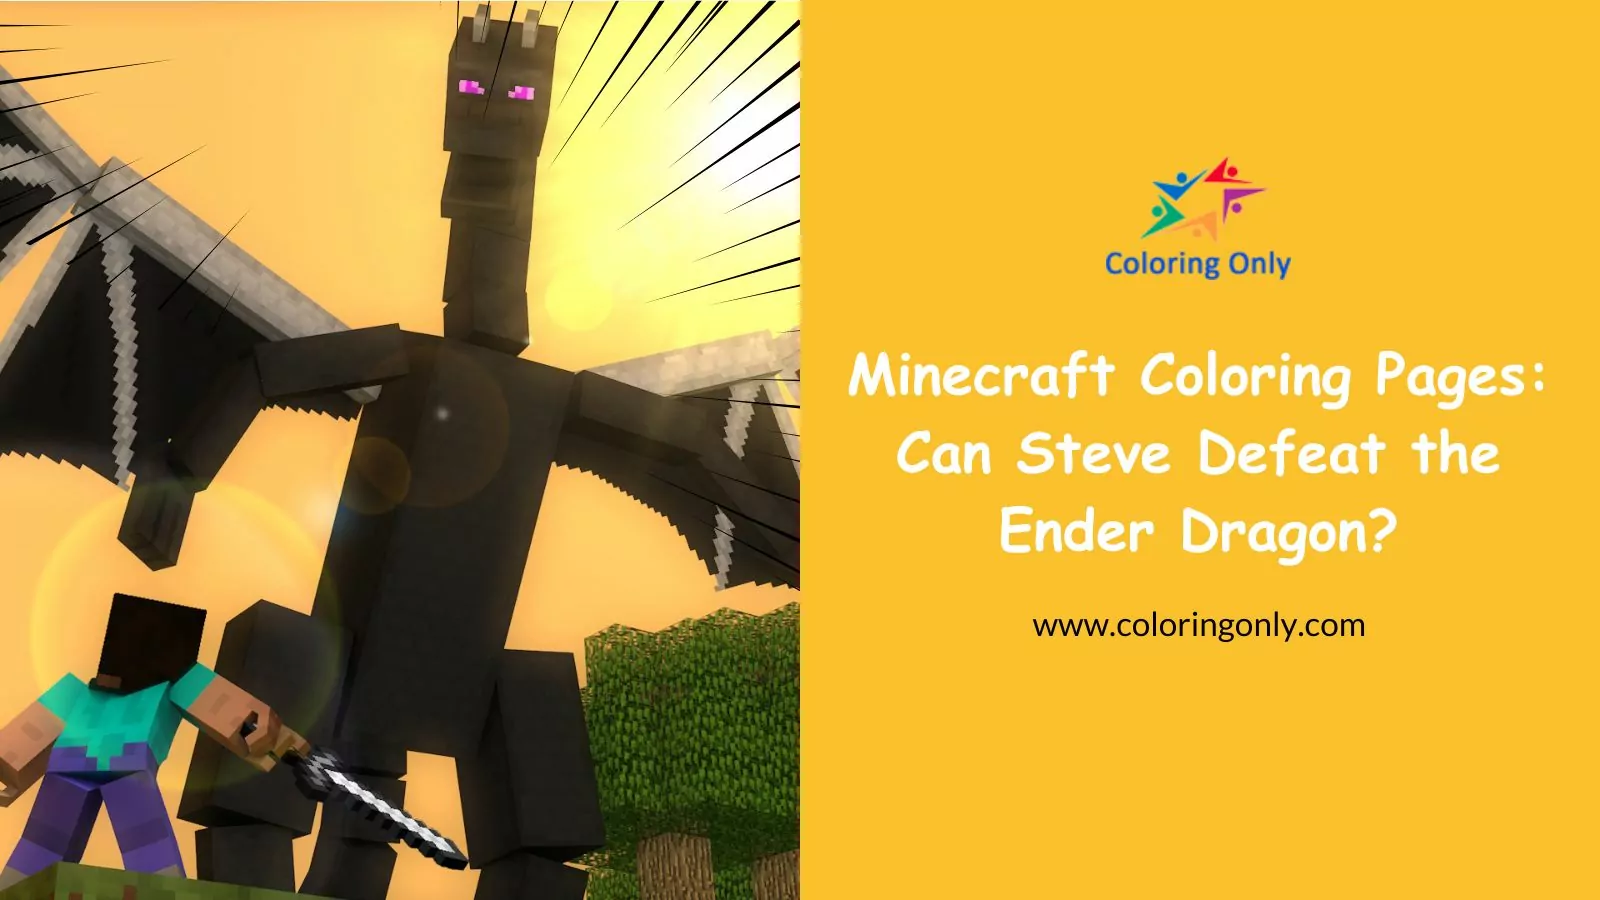 Minecraft Coloring Pages: Can Steve Defeat the Ender Dragon?